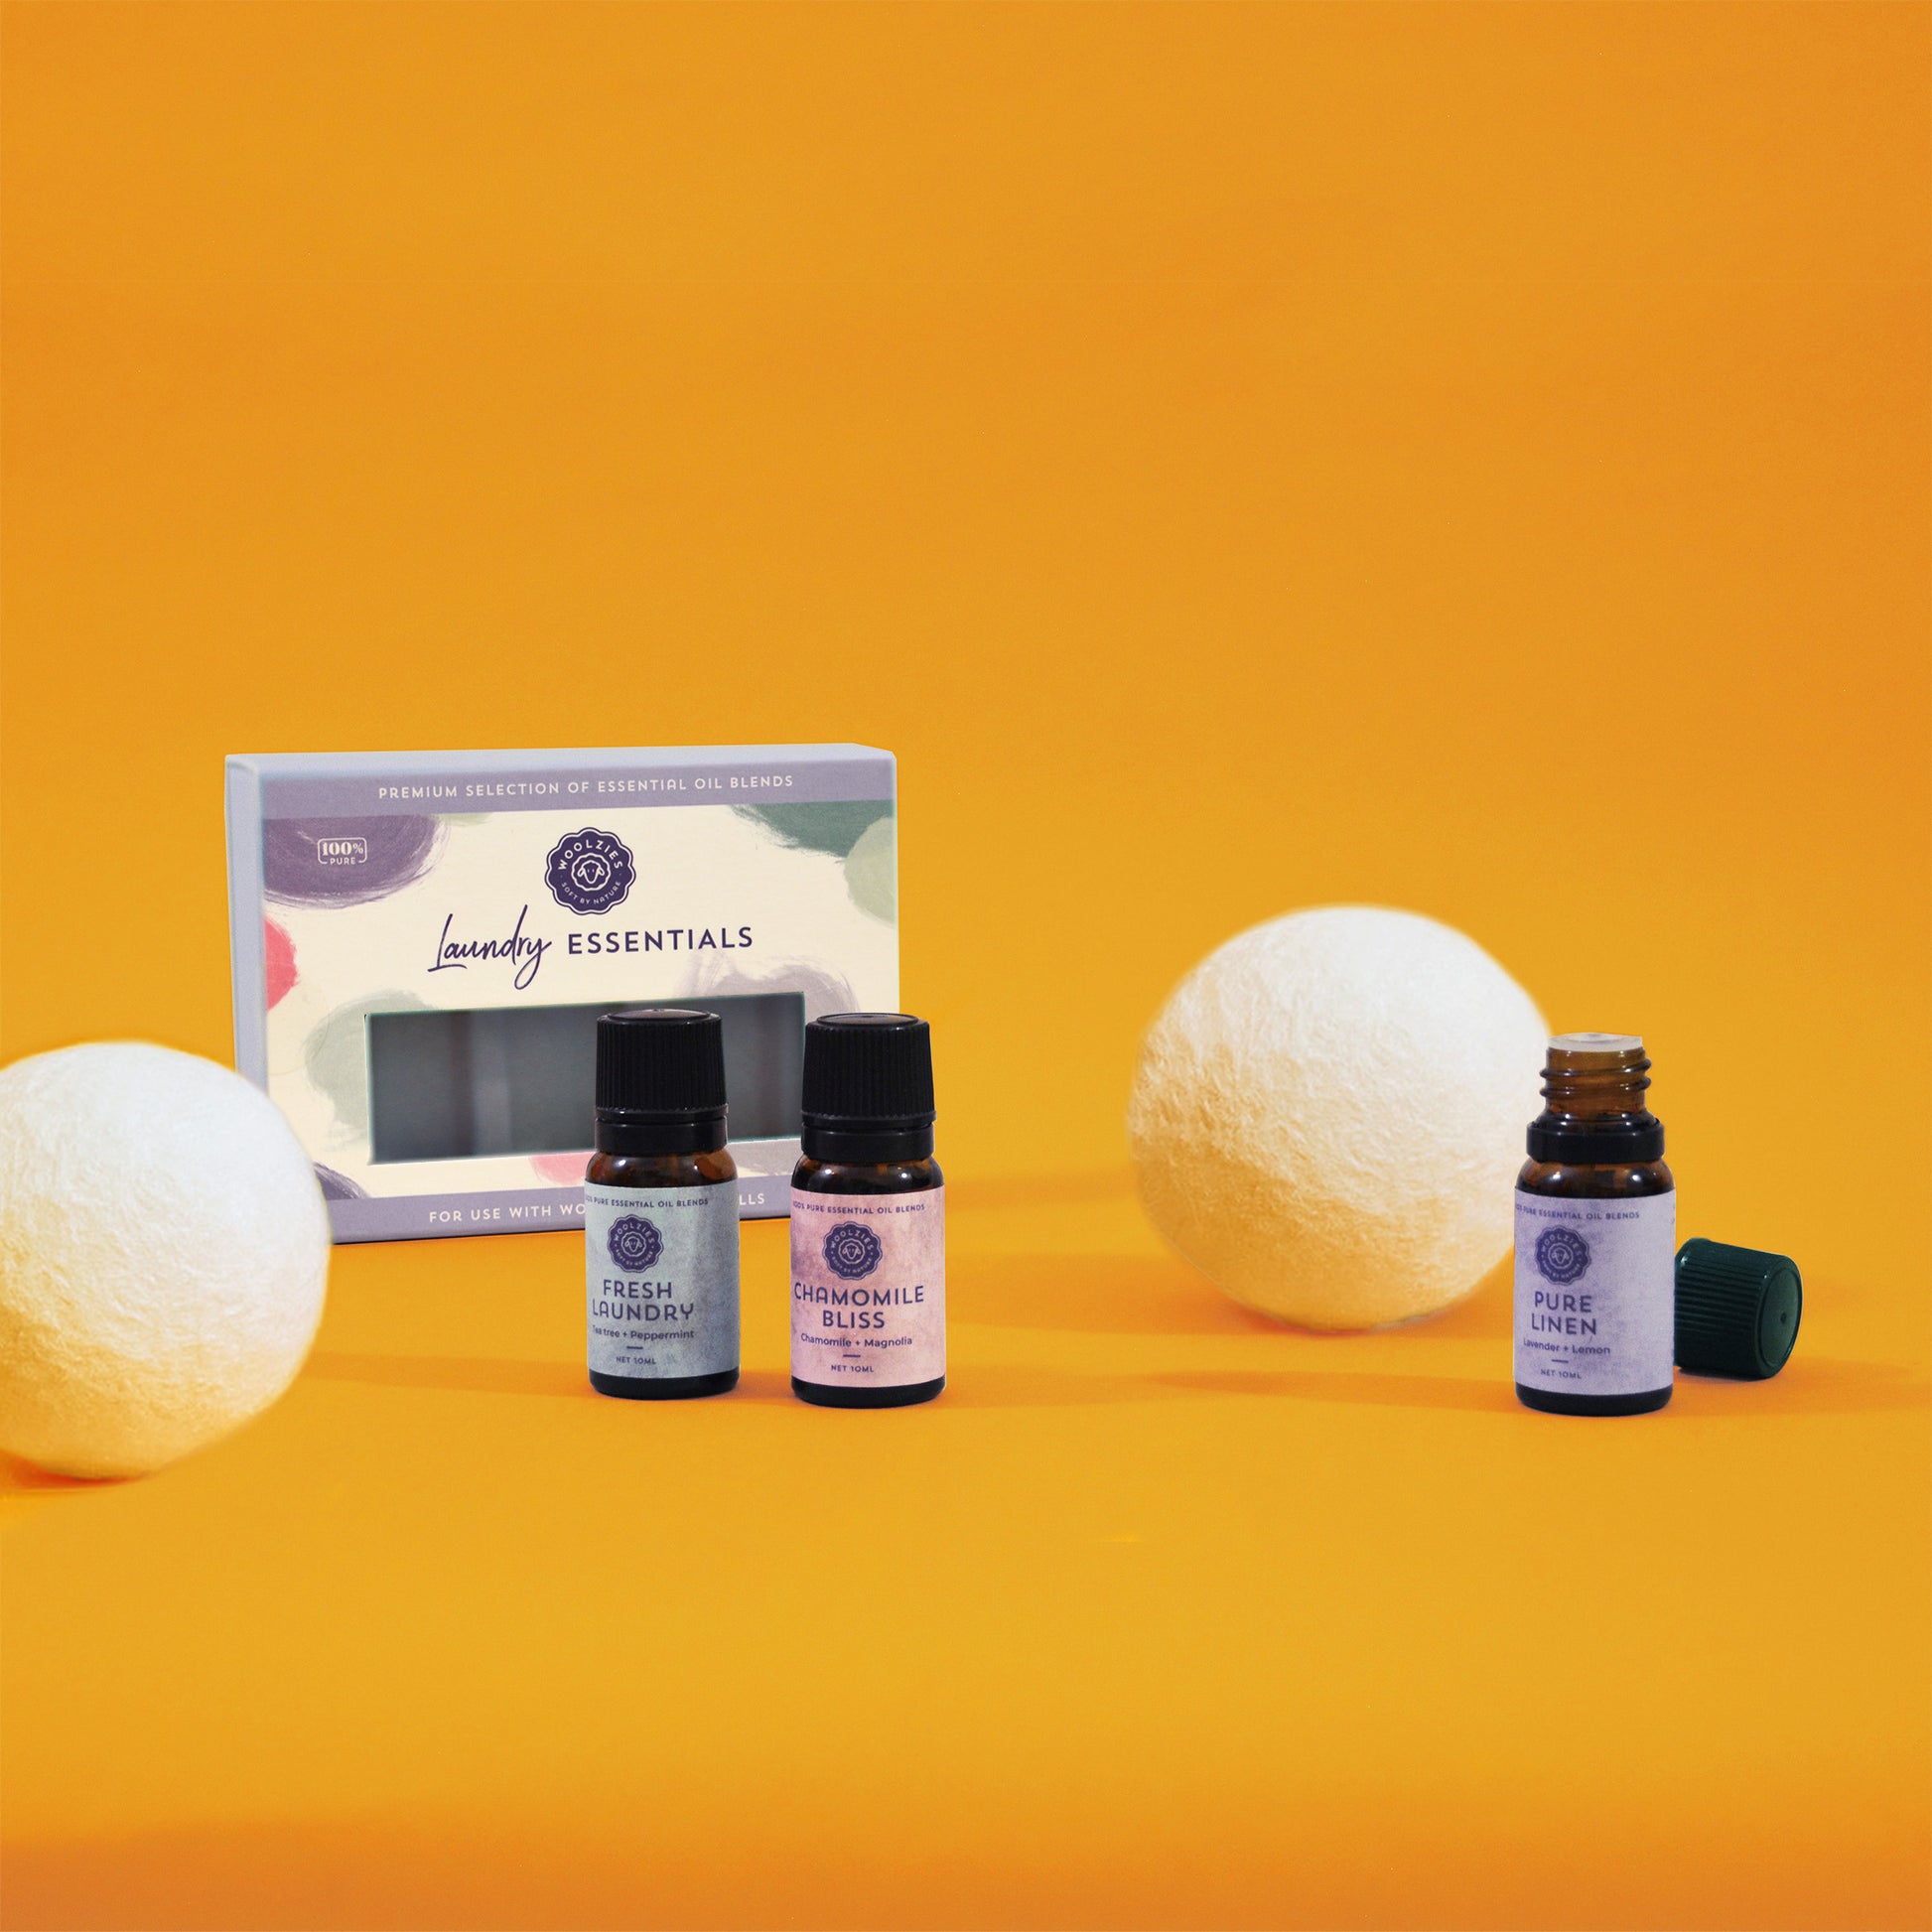 Woolzies essential oil blends for laundry and white wool dryer balls